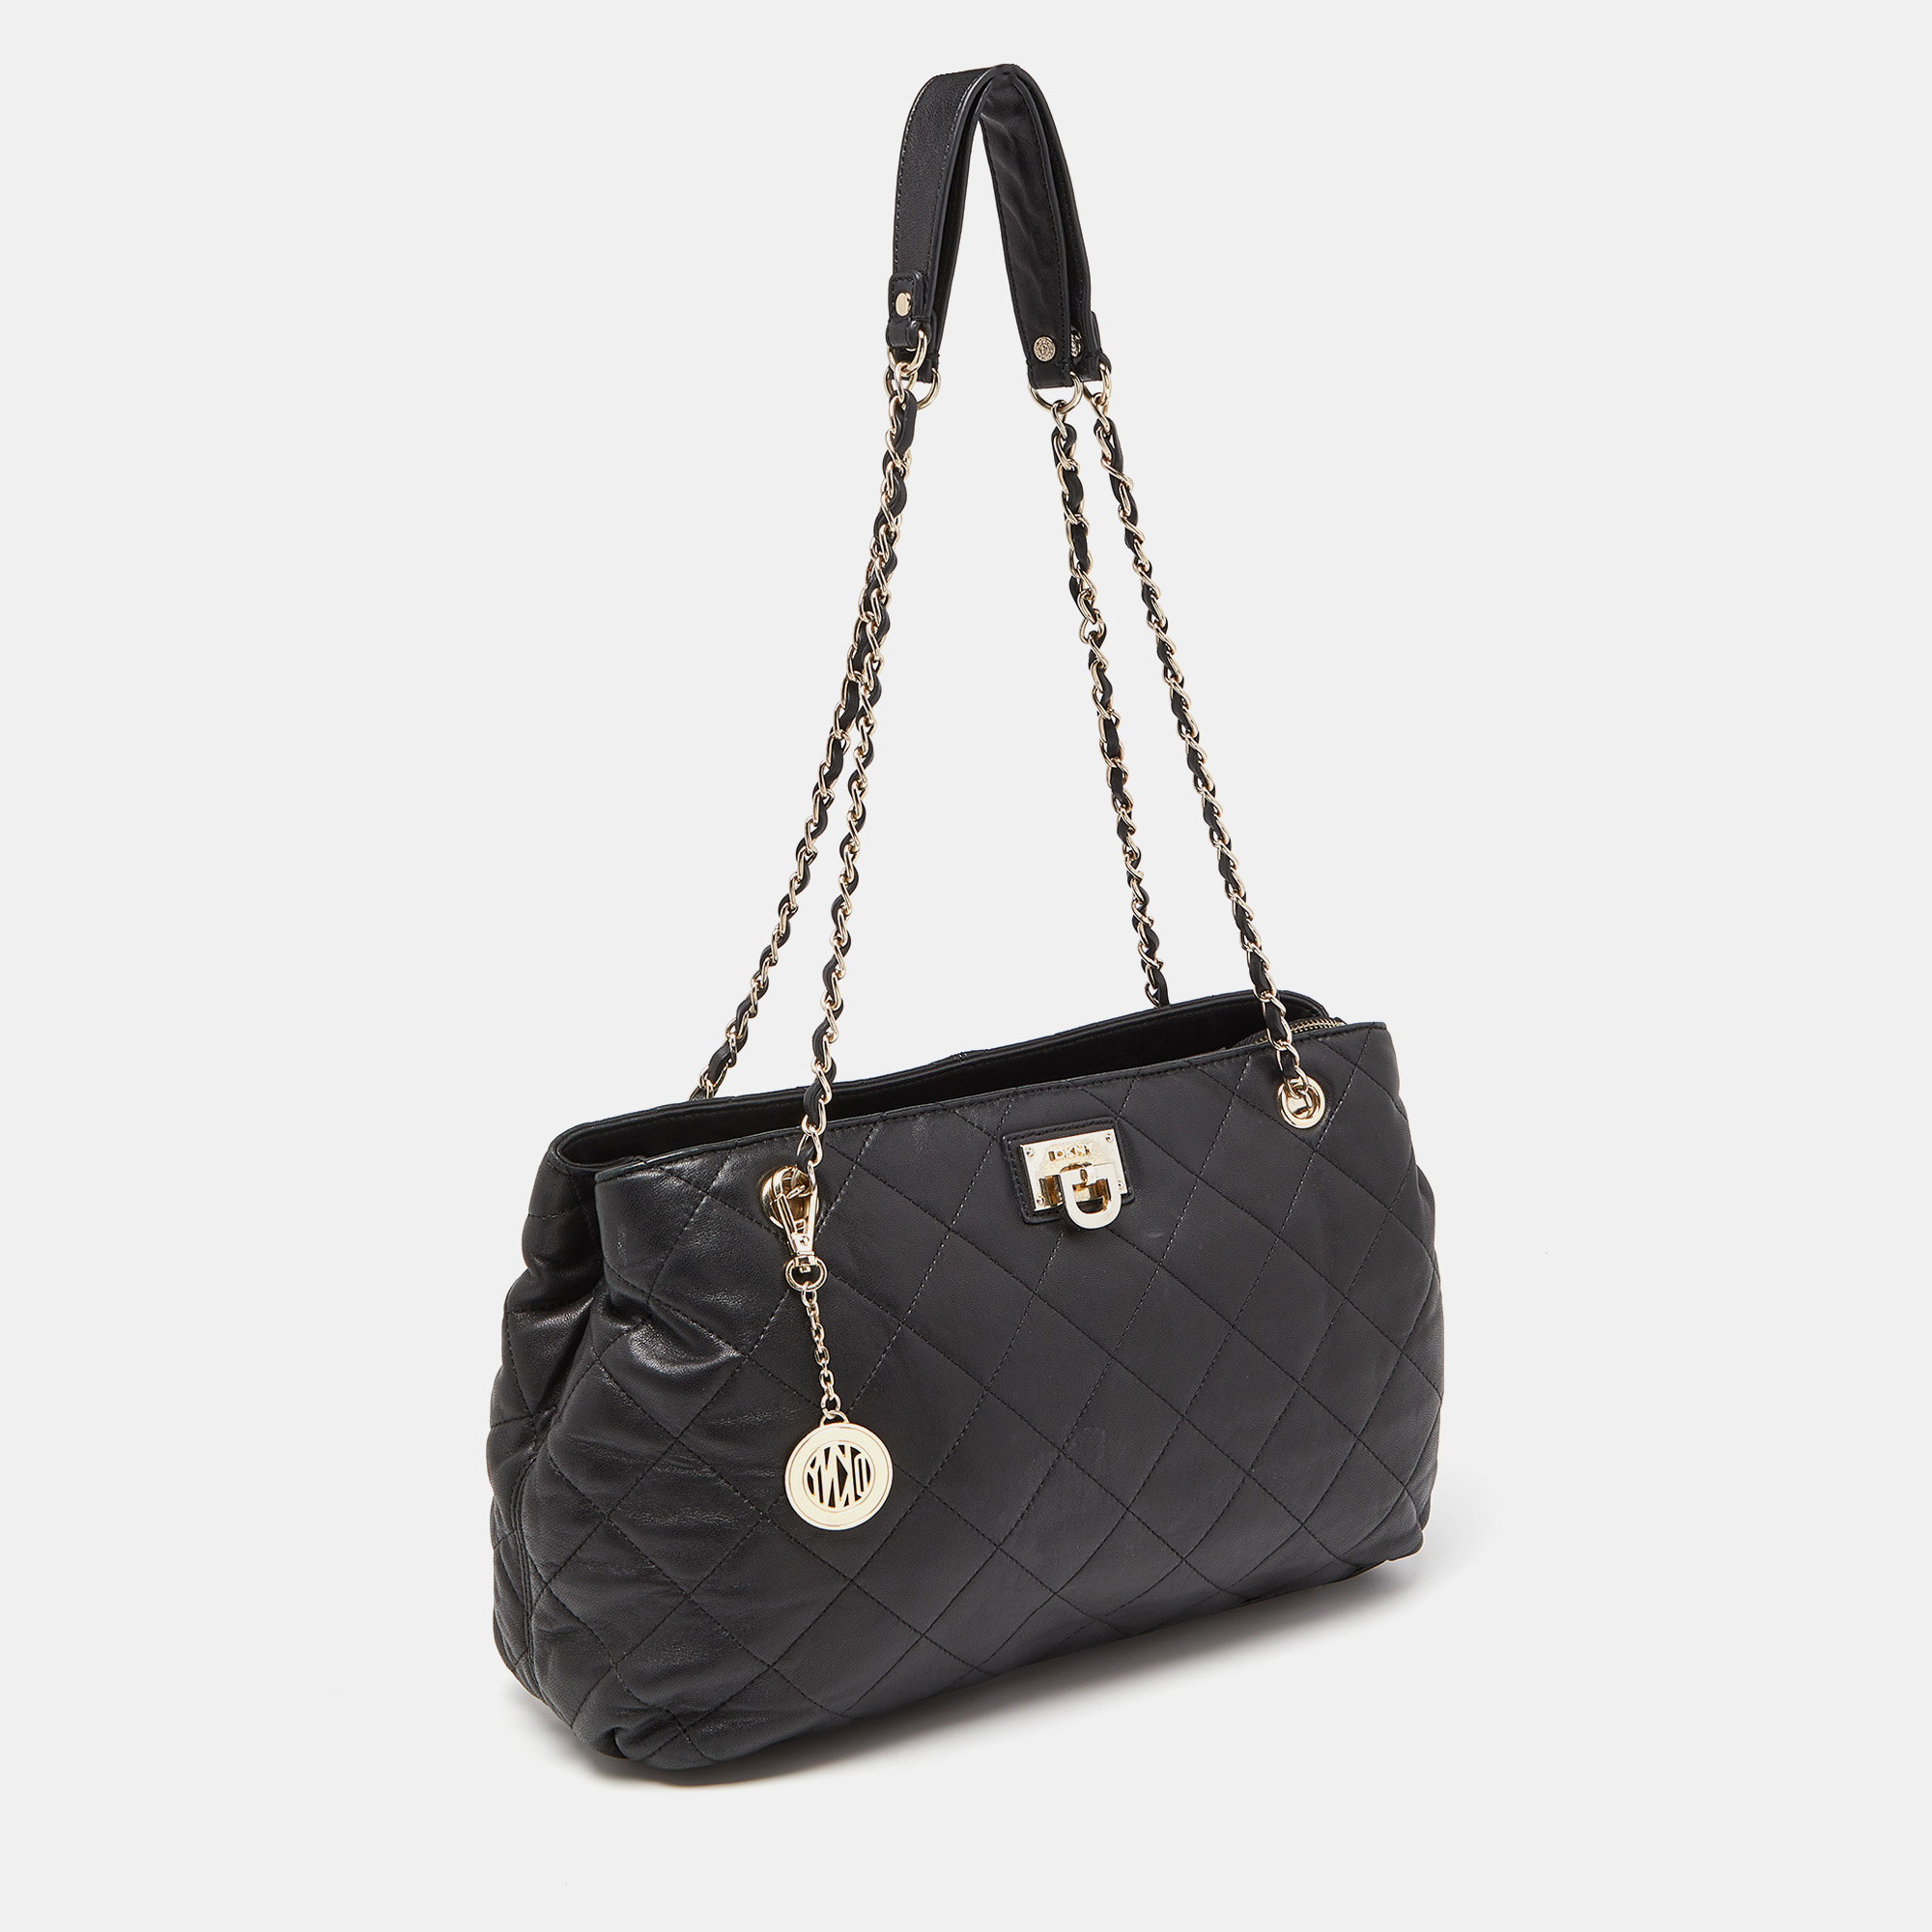 DKNY Black Quilted Leather Chain Tote